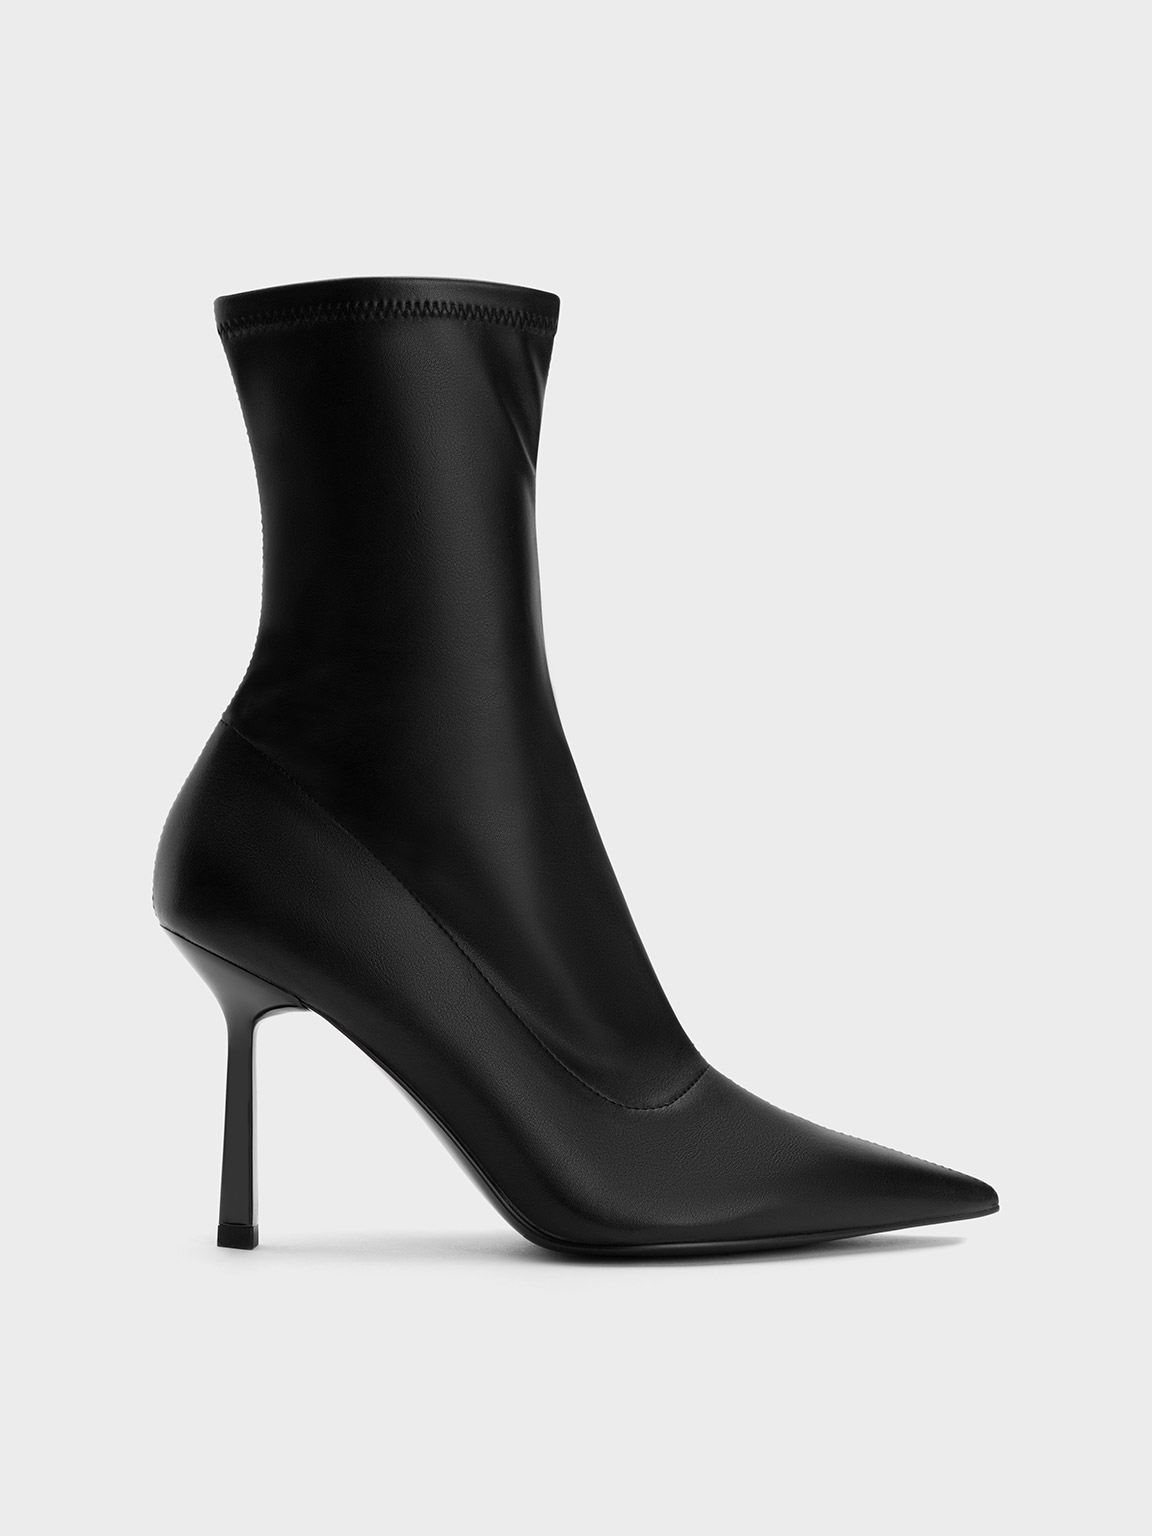 Ankle Boots Women - Buy Ankle Boots Women online in India